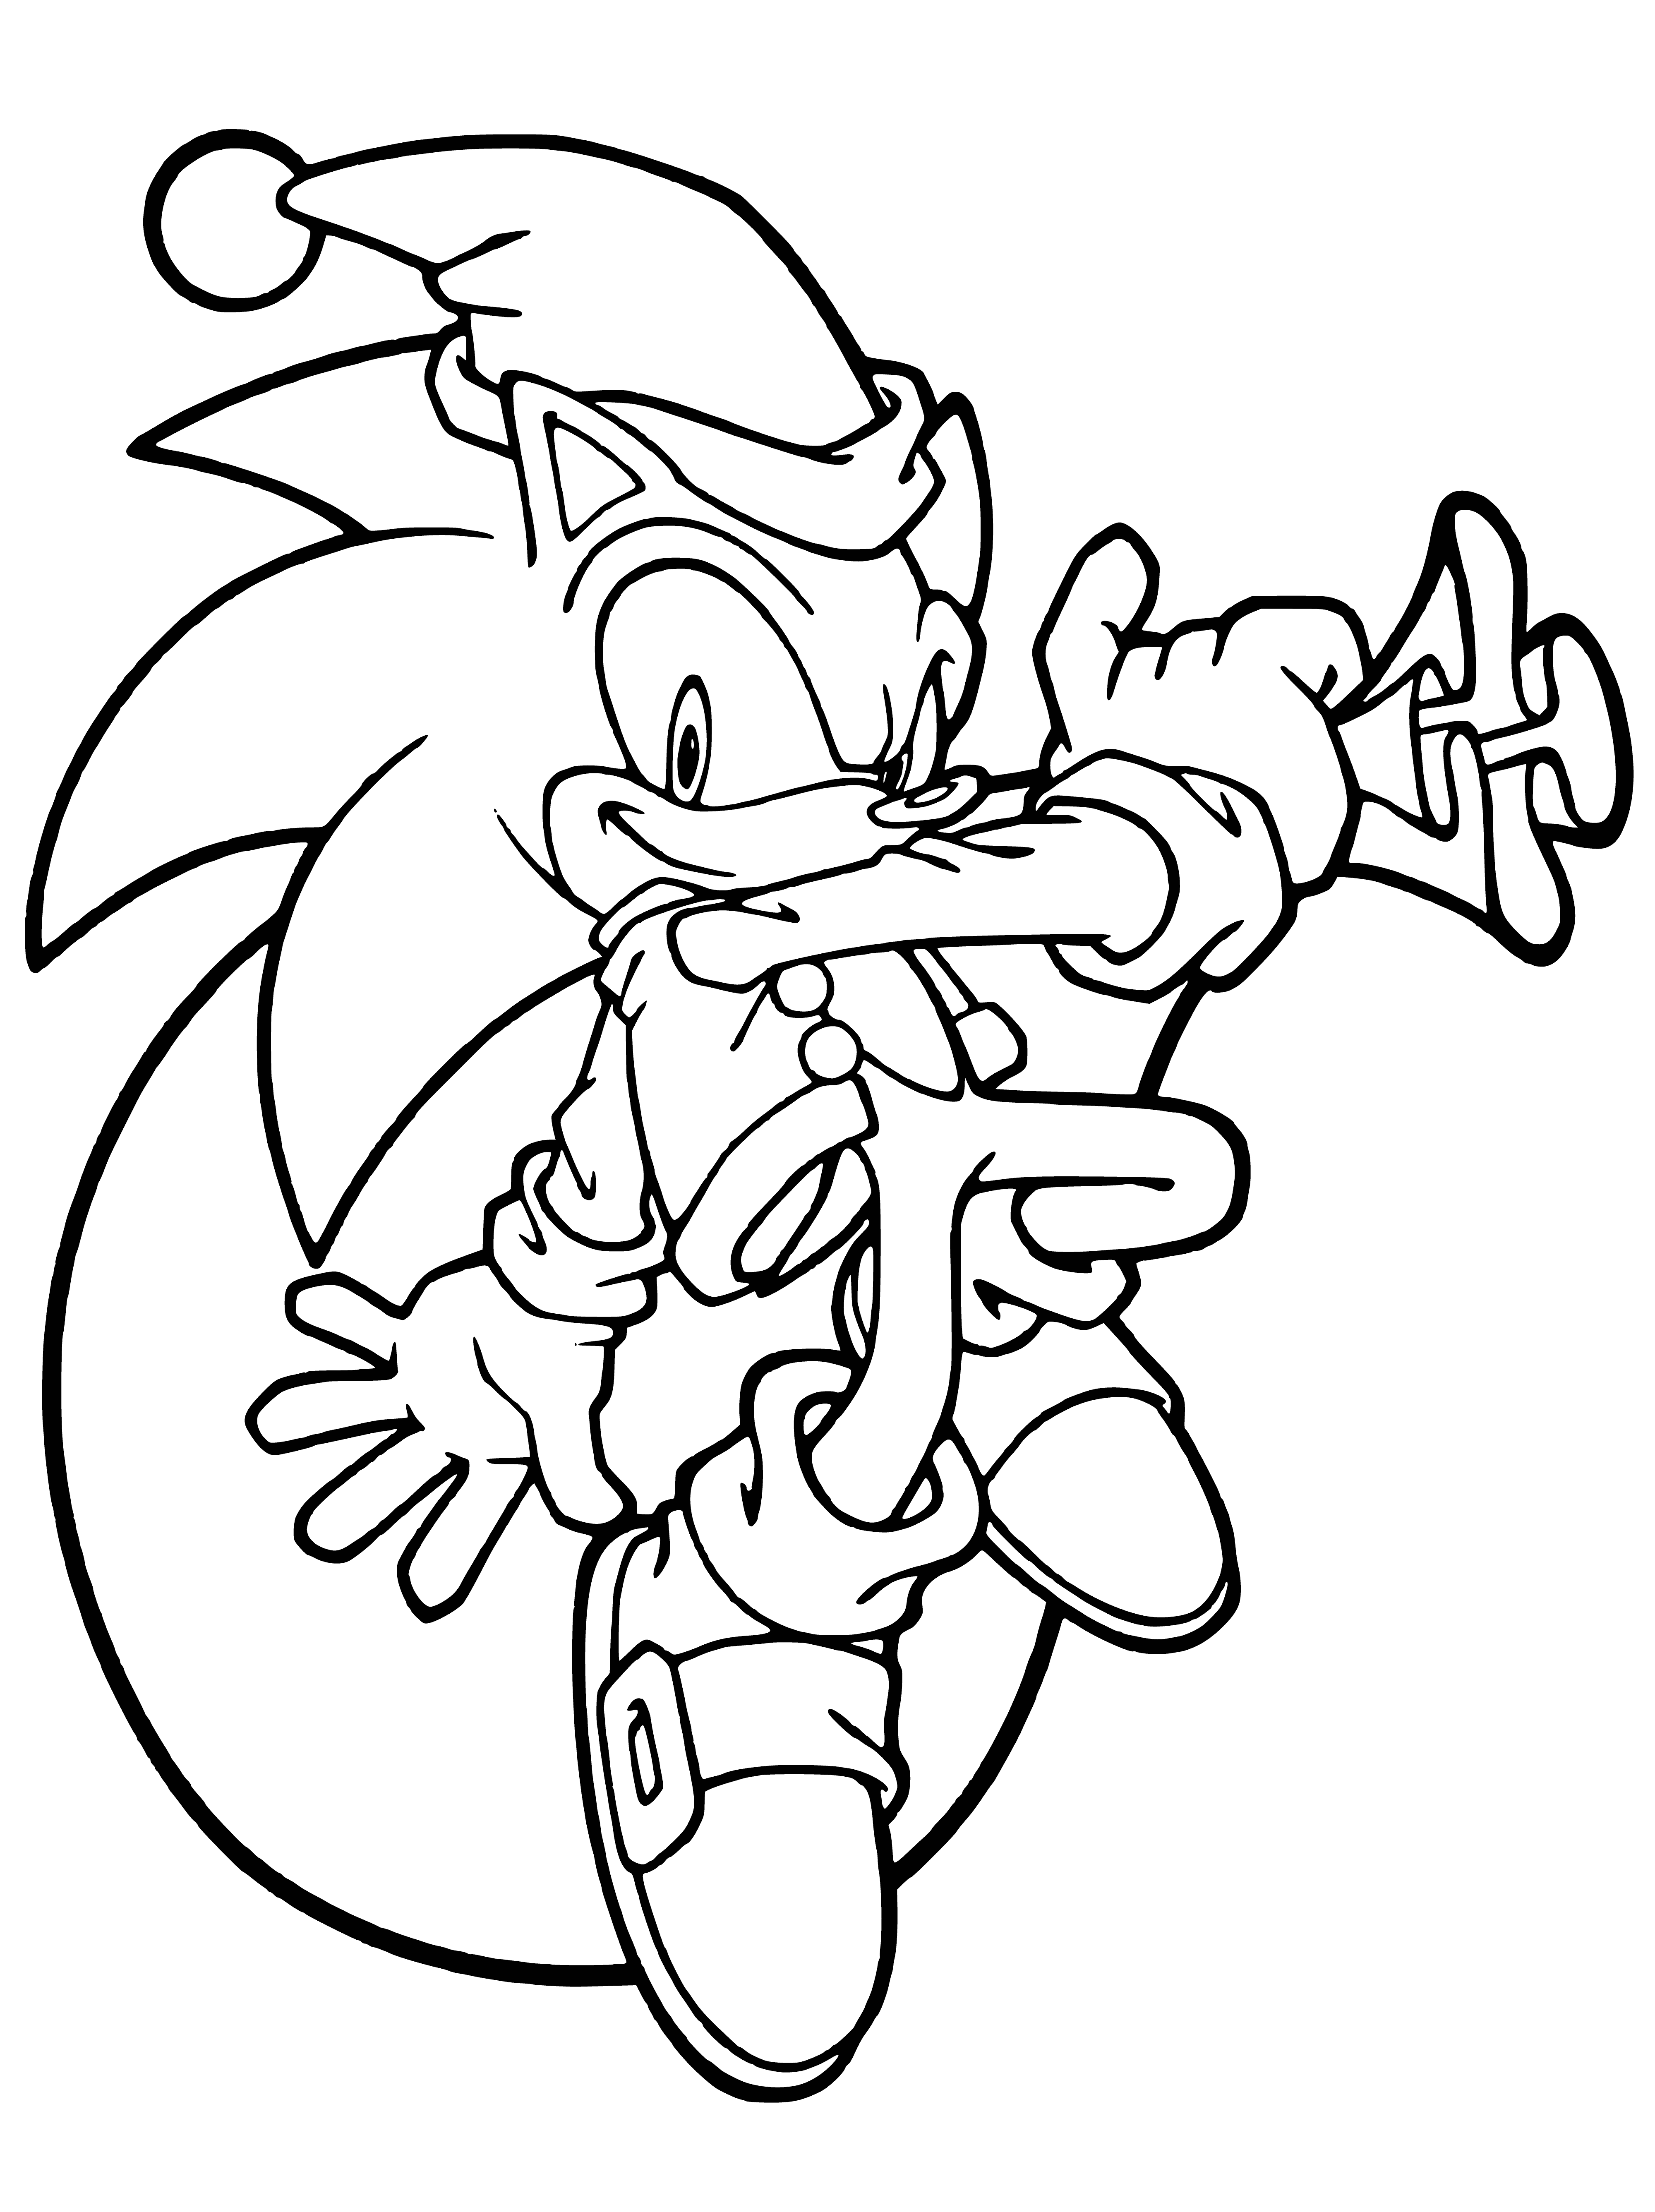 coloring page: Sonic celebrates New Year's Eve, wearing a party hat, holding a streamer & beaming in front of a glittering sign.